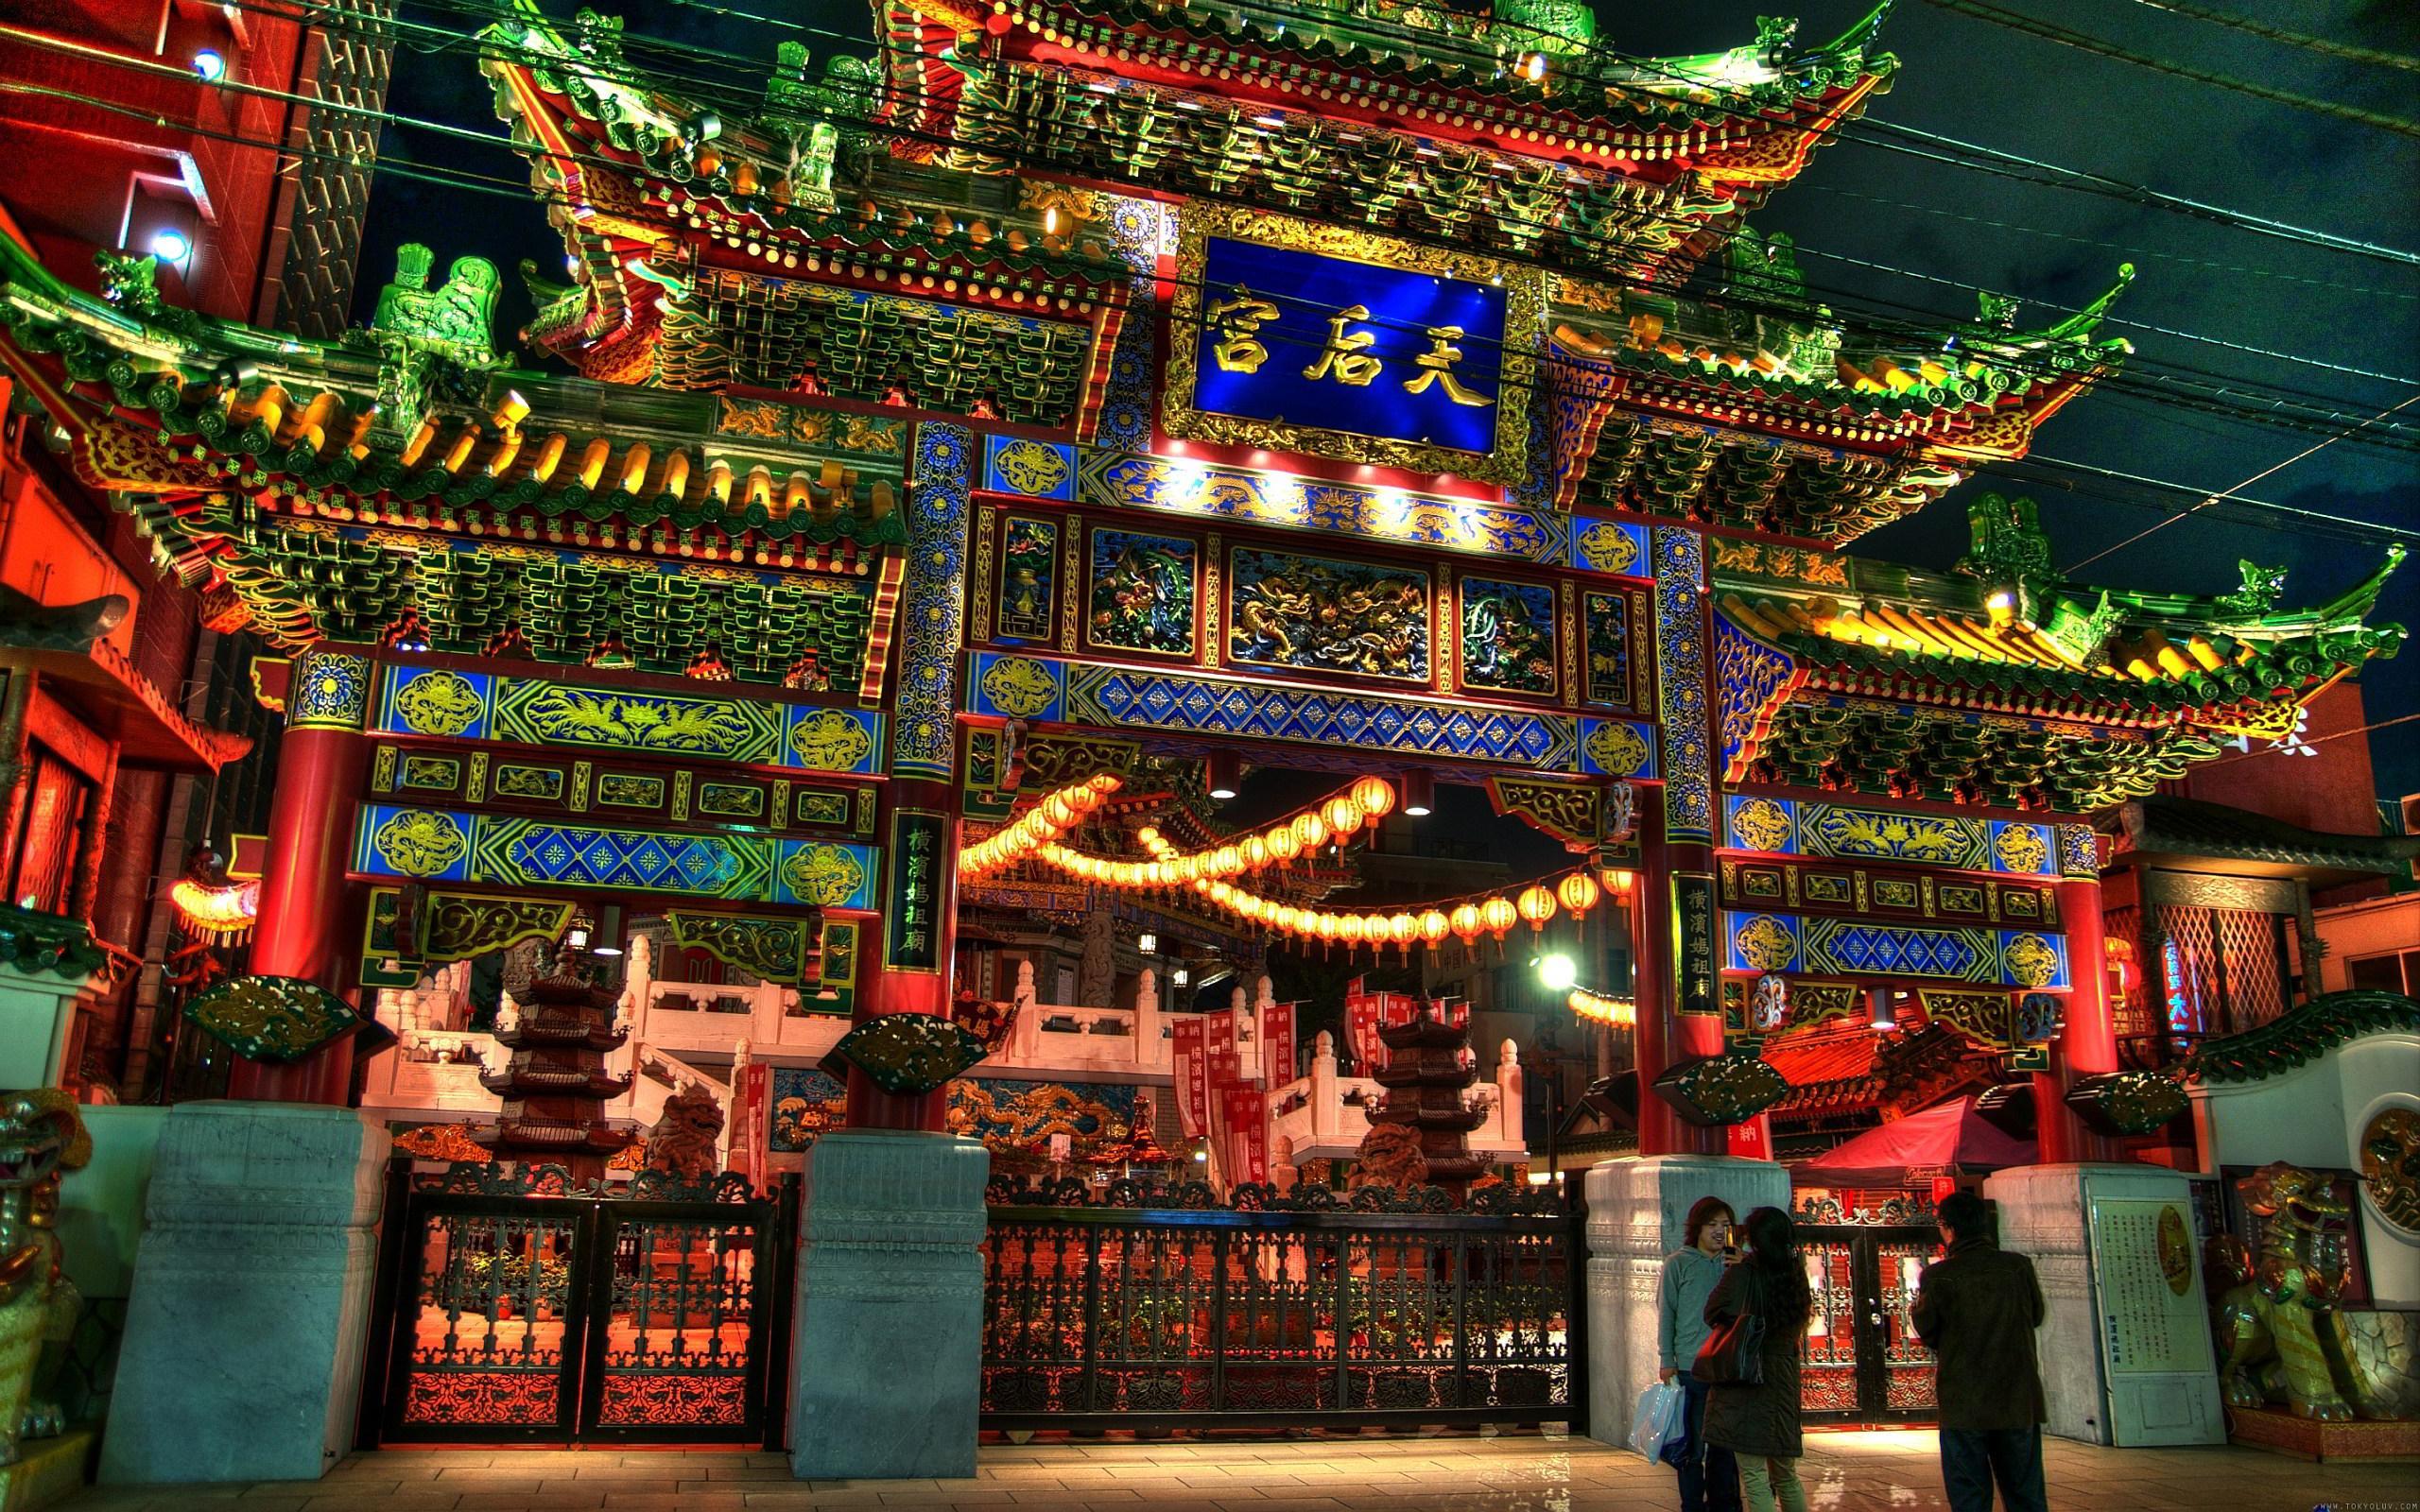 Chinatown Wallpaper, image collections of wallpaper